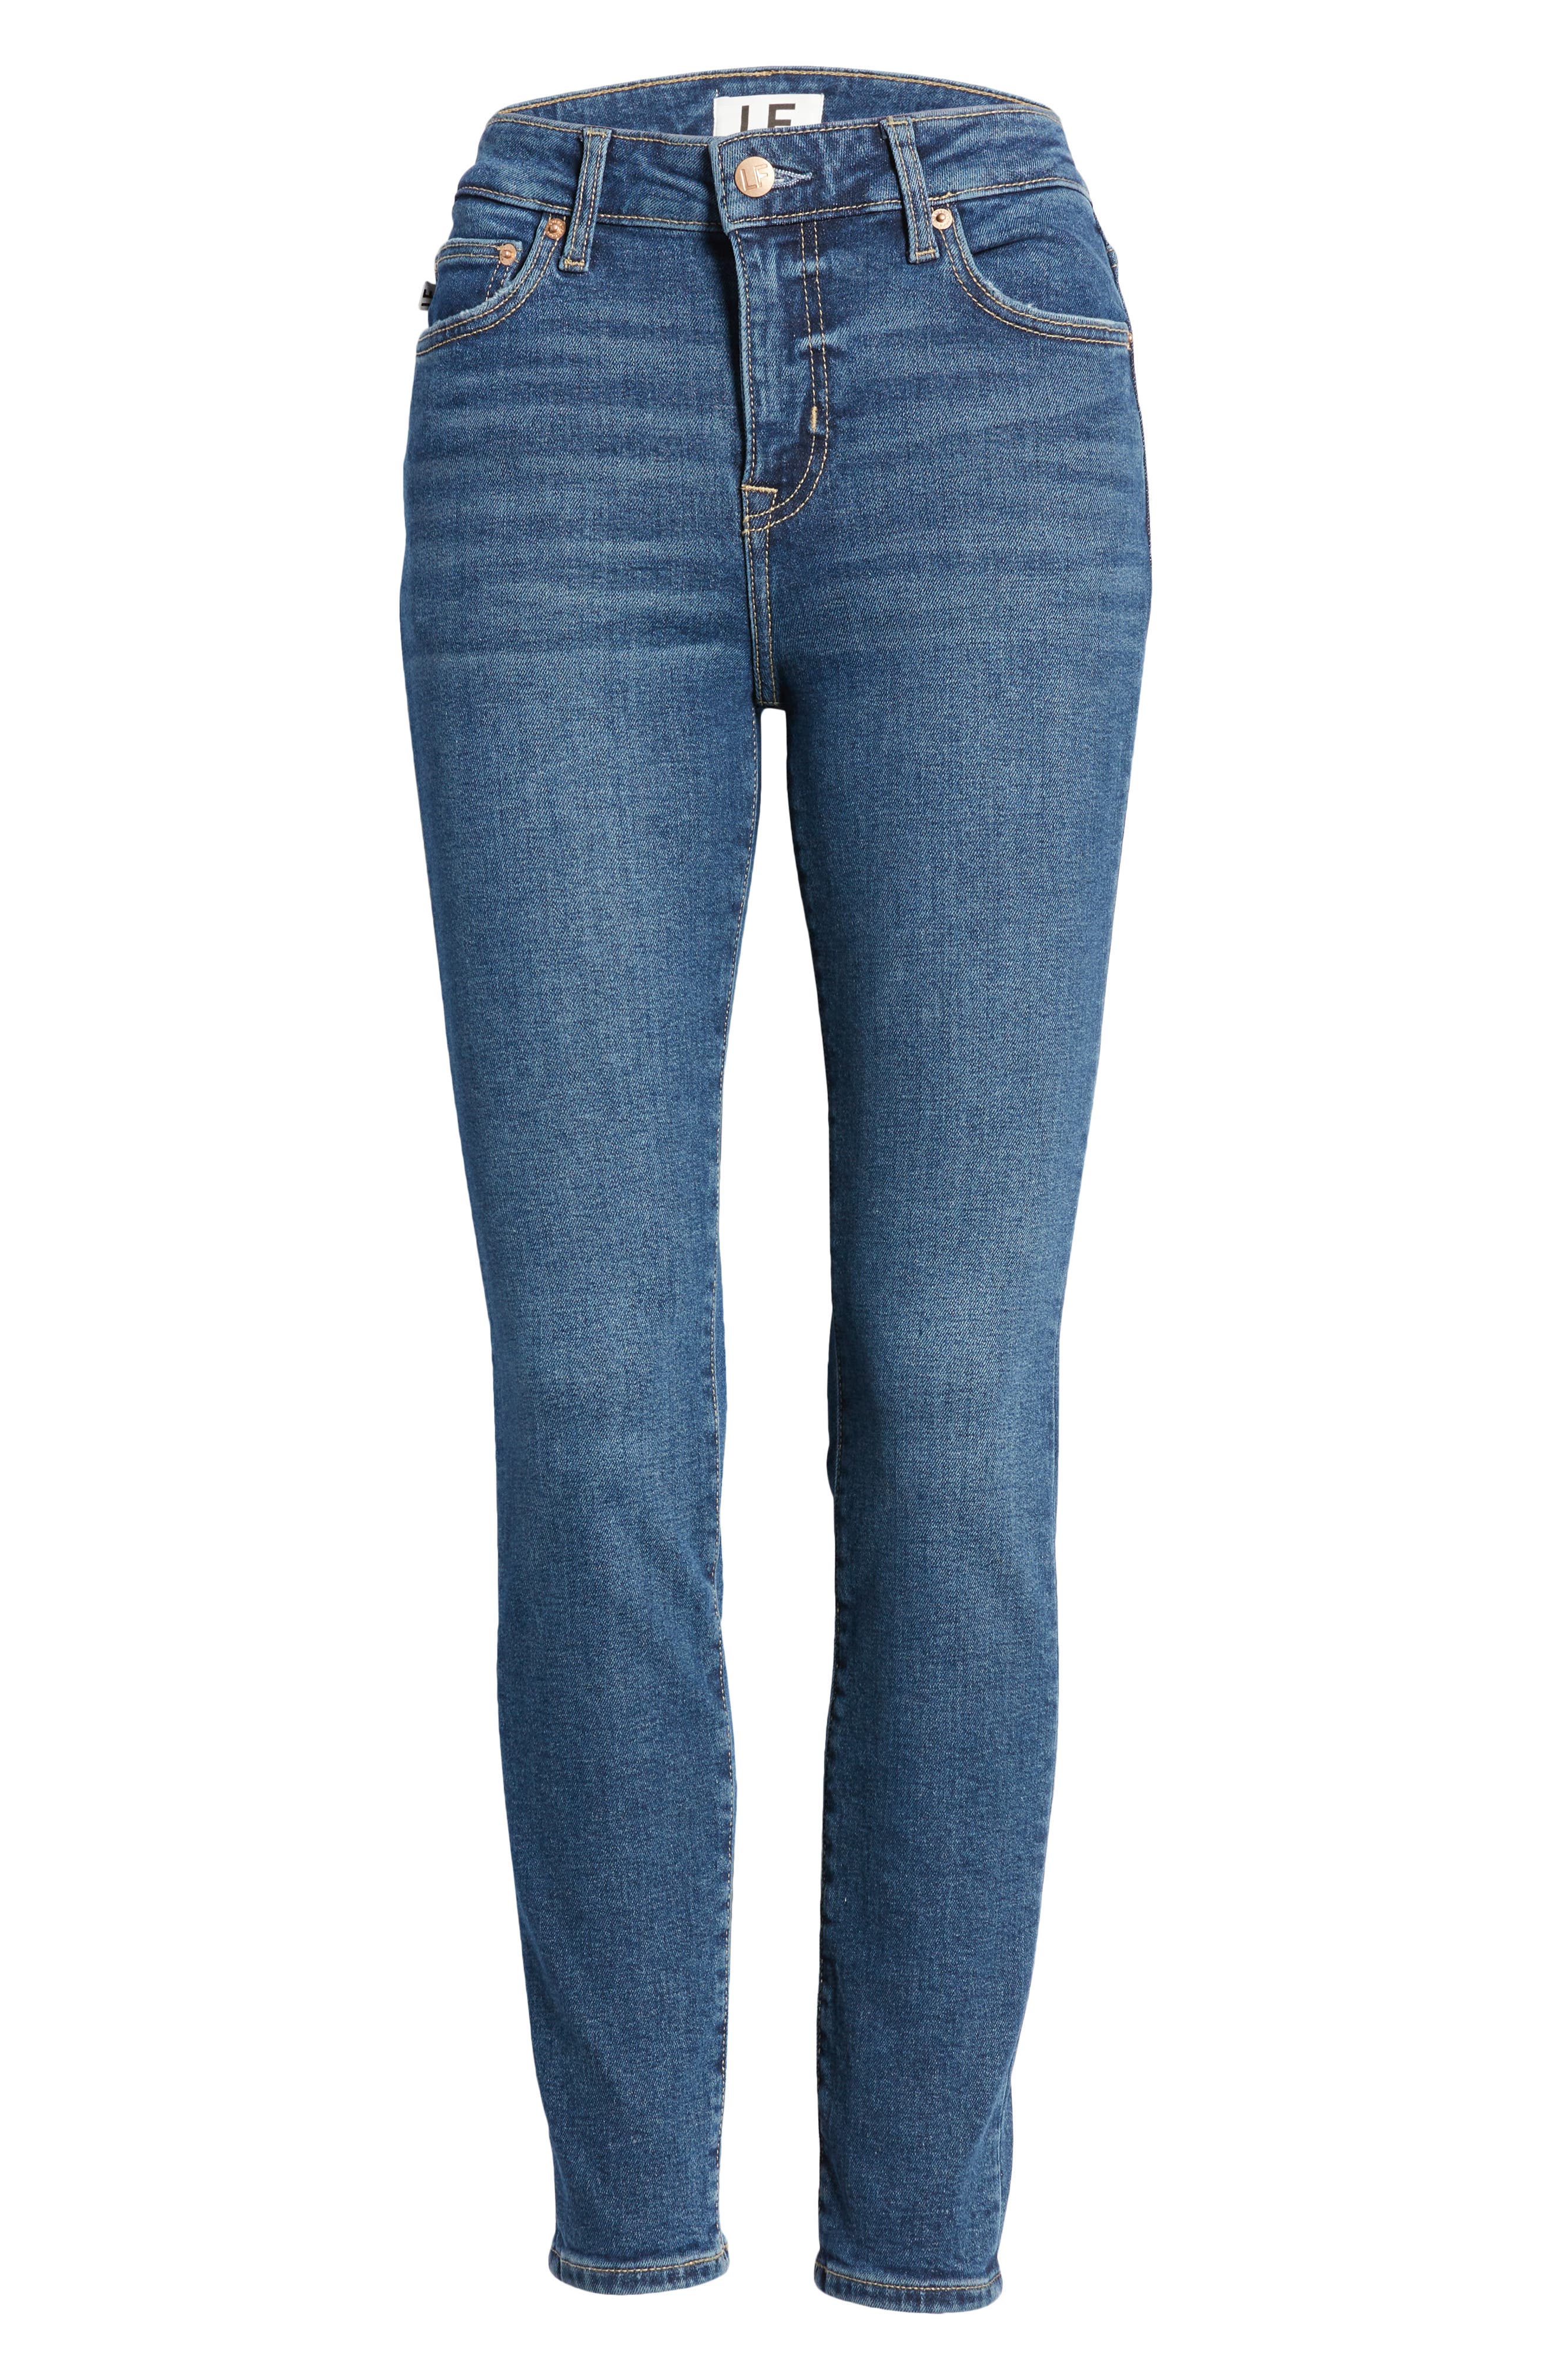 Lovers + Friends Ricky High Waist Ankle Skinny Jeans in Verona